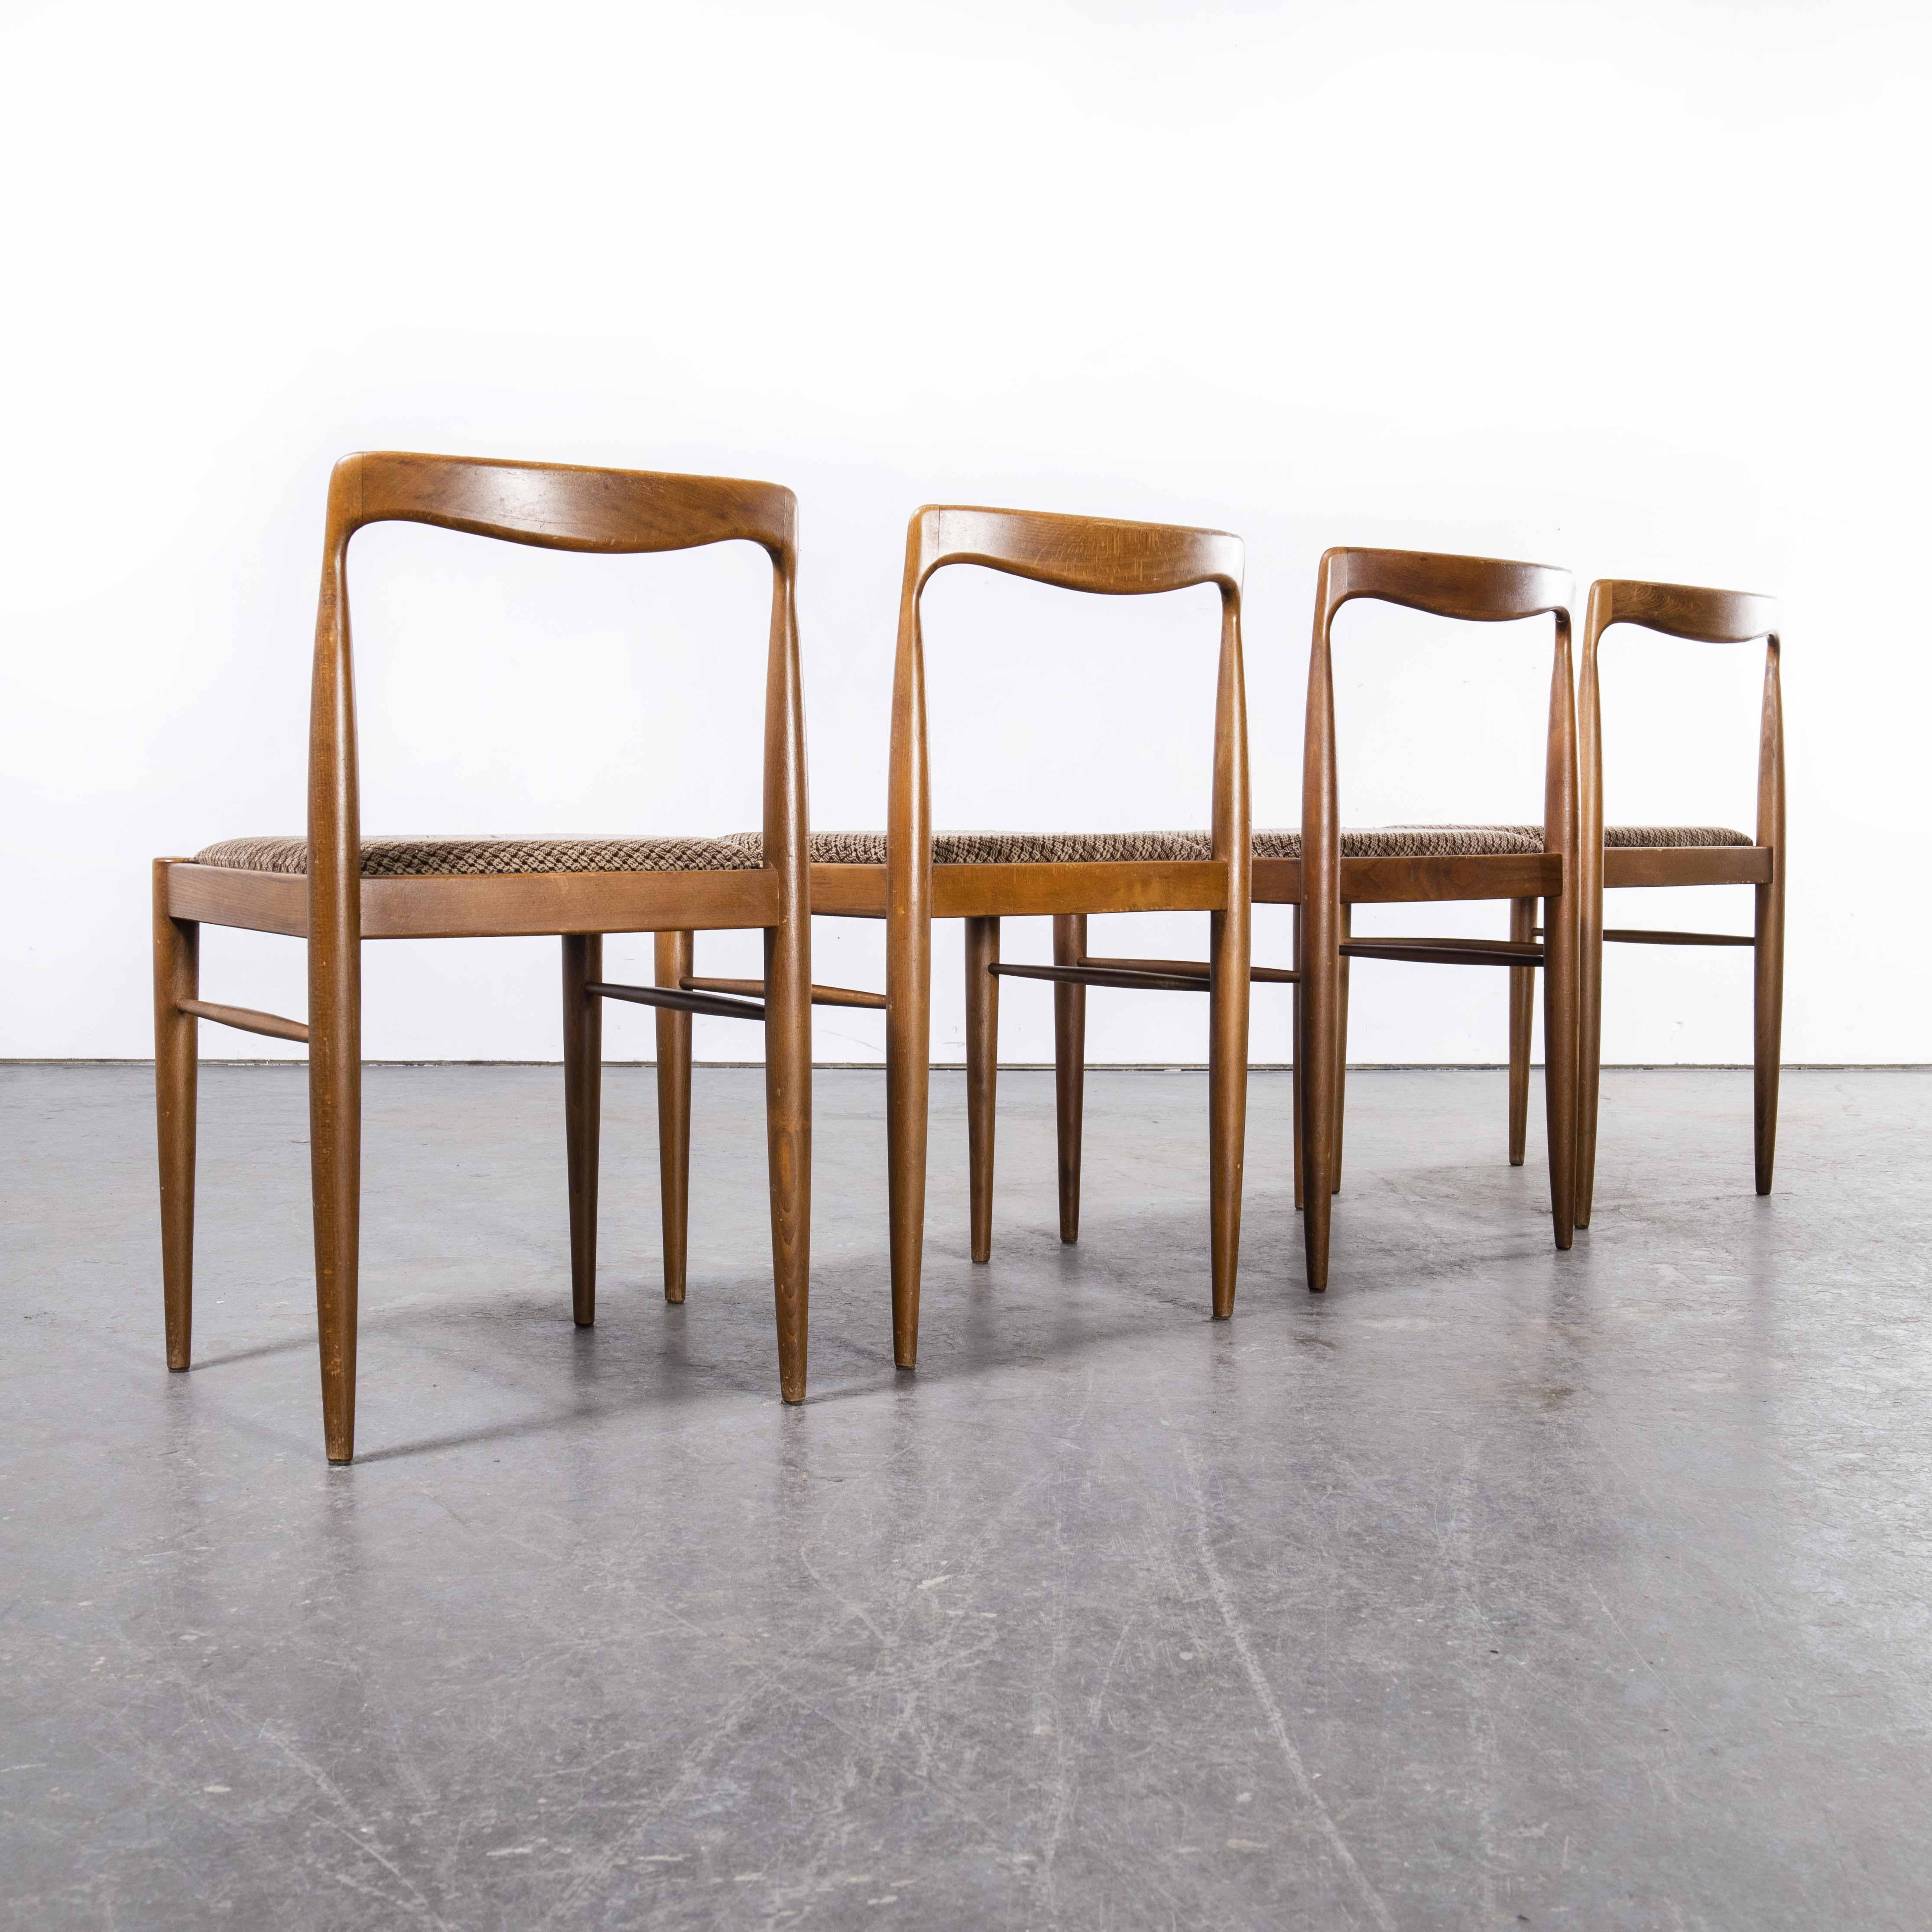 1950's Mid Century Teak Dining Chairs, Set of Four For Sale 3